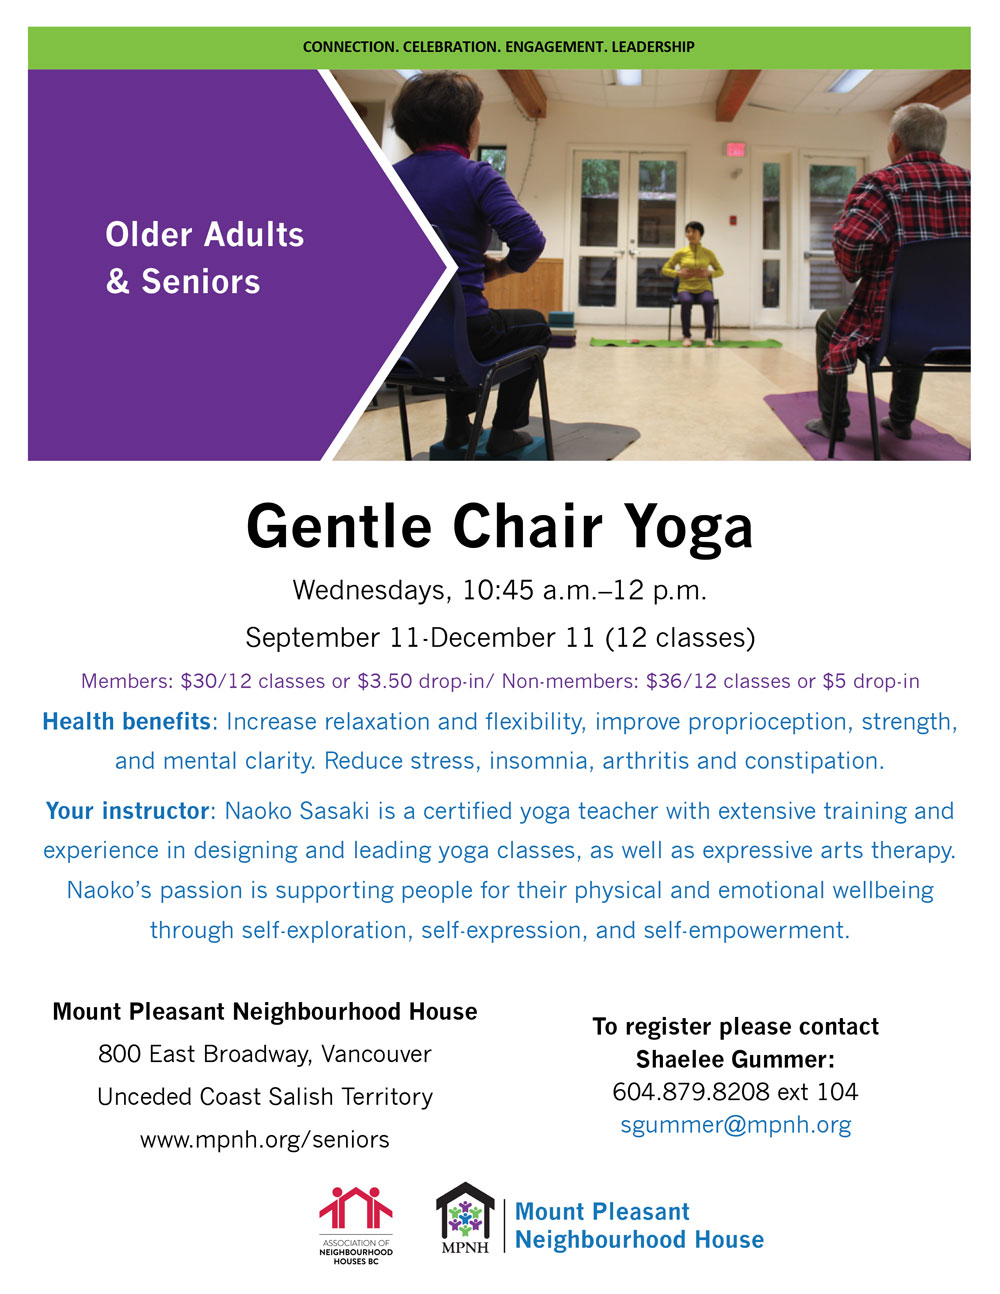 An image of the poster with program details, featuring two seniors and the instructor doing seated yoga exercises